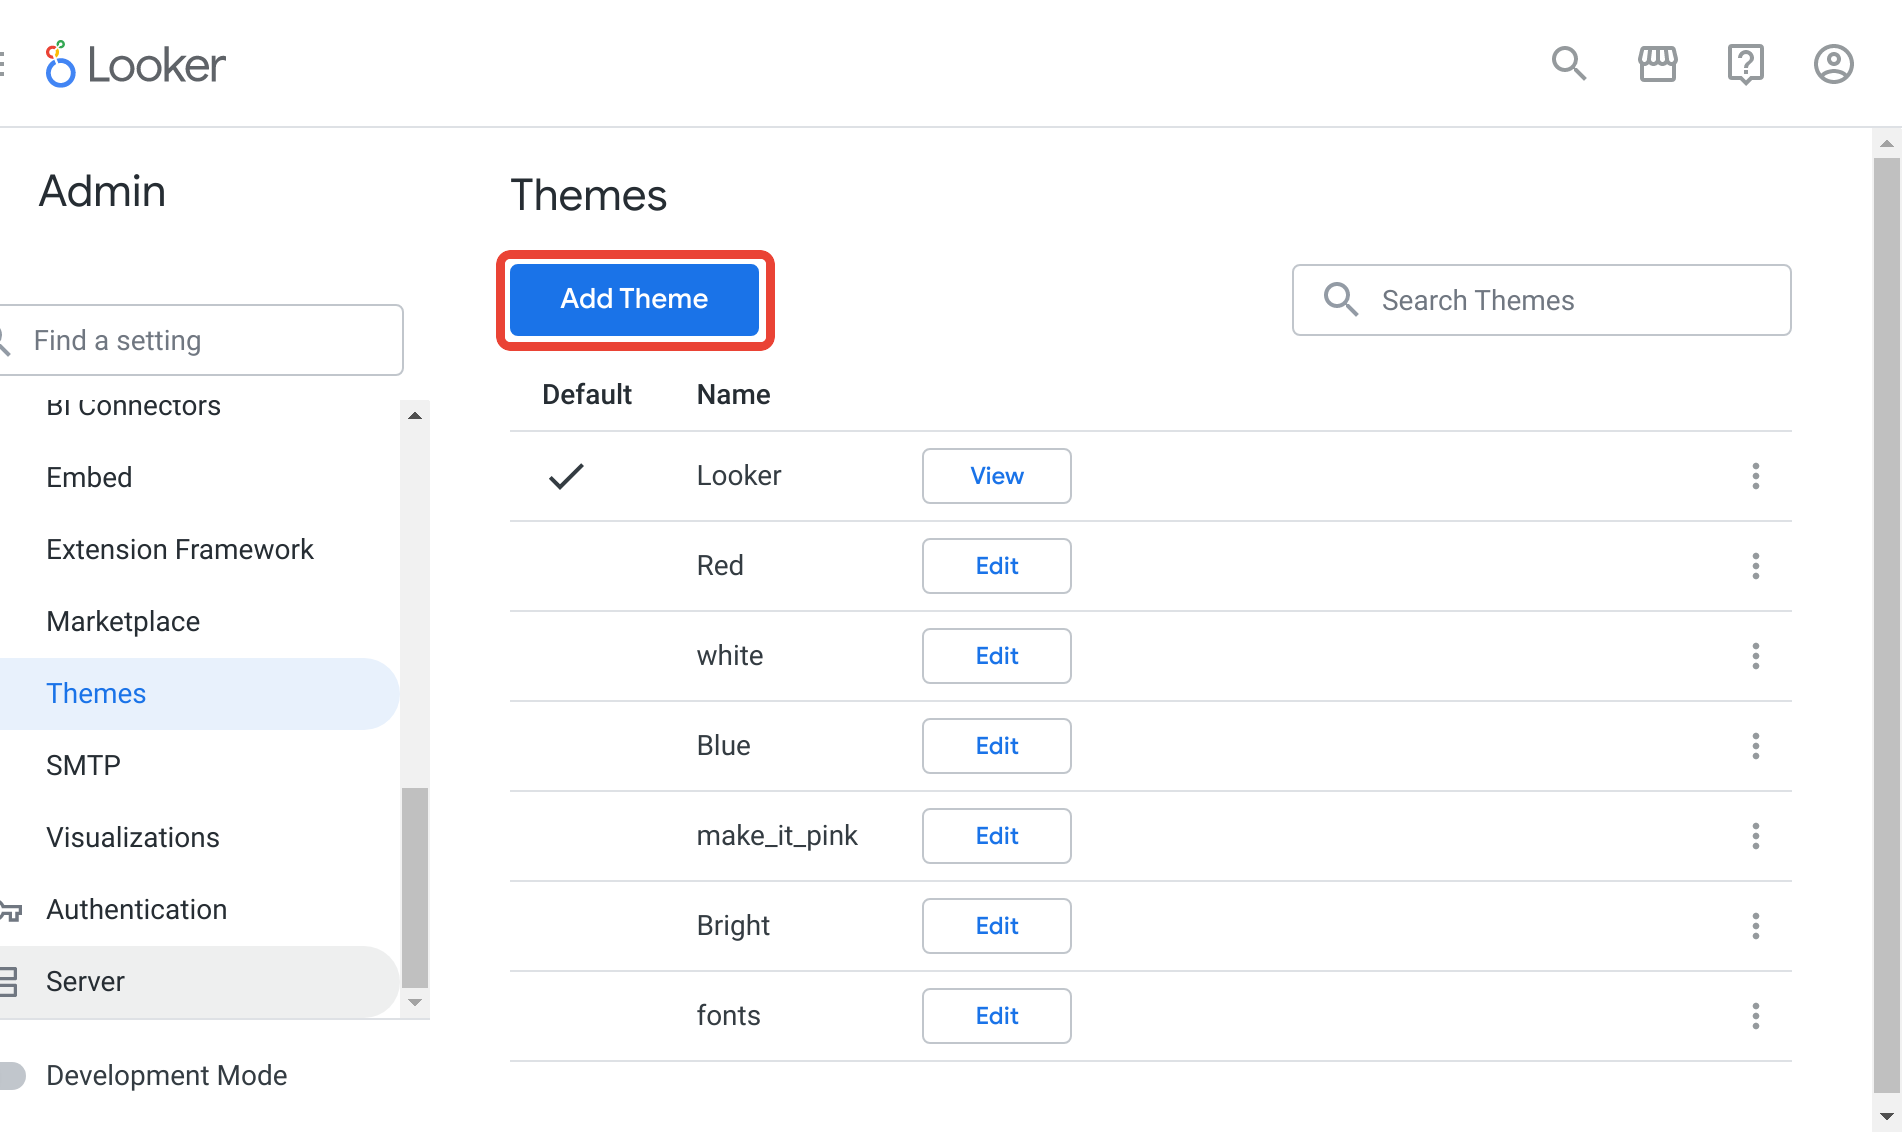 The Add Theme button appears at the top of the Themes page.